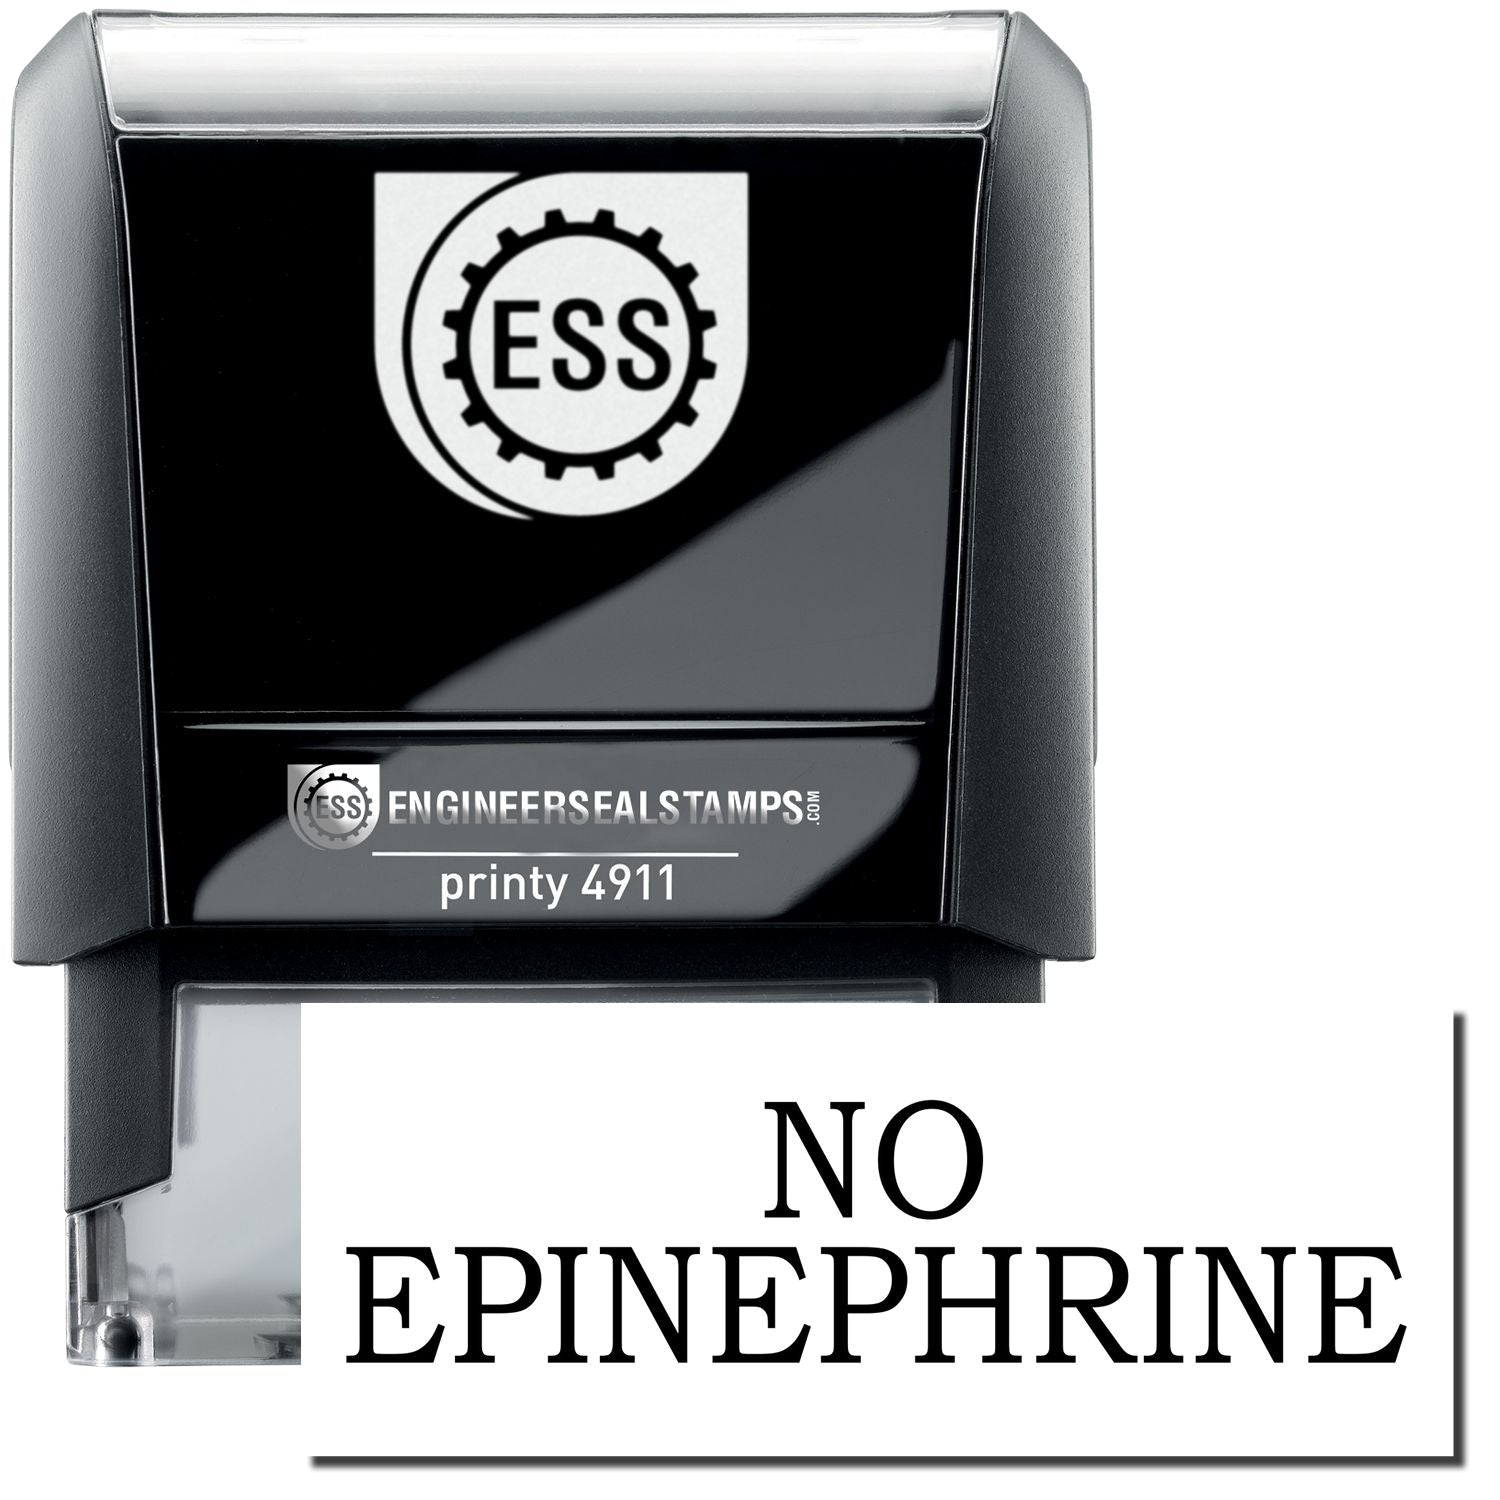 A self-inking stamp with a stamped image showing how the text "NO EPINEPHRINE" is displayed after stamping.